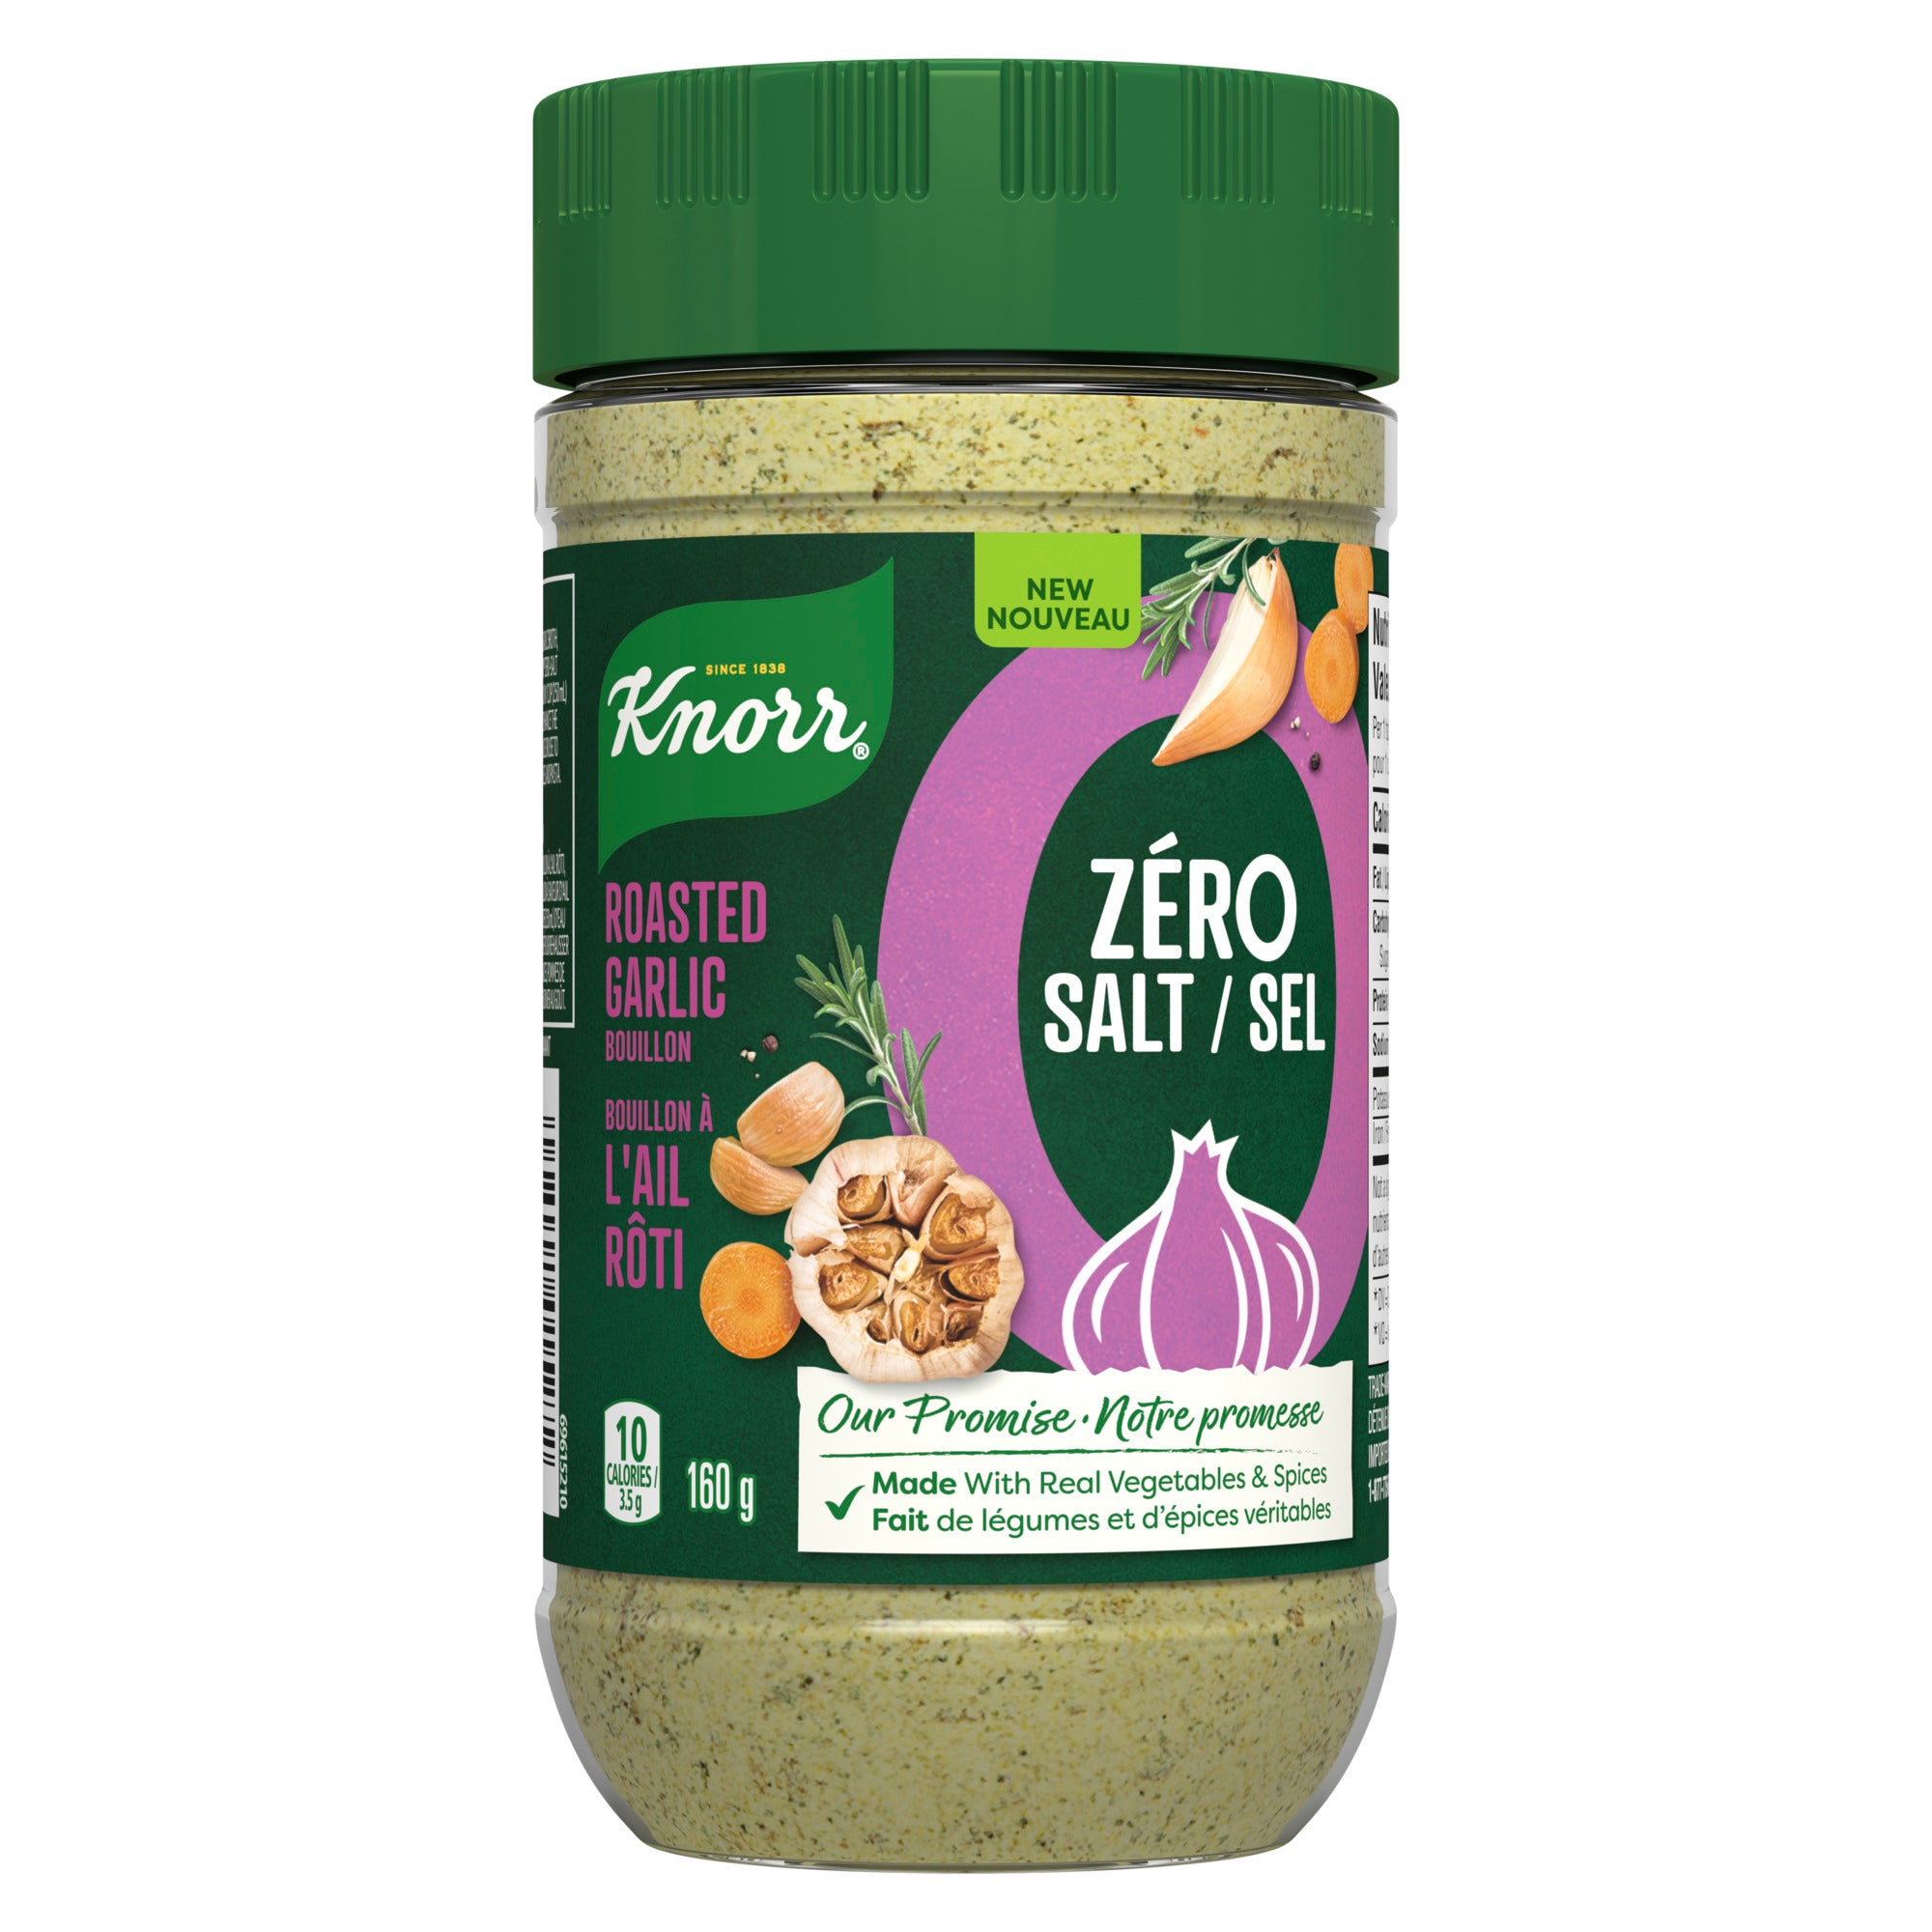 Showing the frontside view of the Knorr Zero Salt Roasted Garlic Bouillon Powder 160g product.